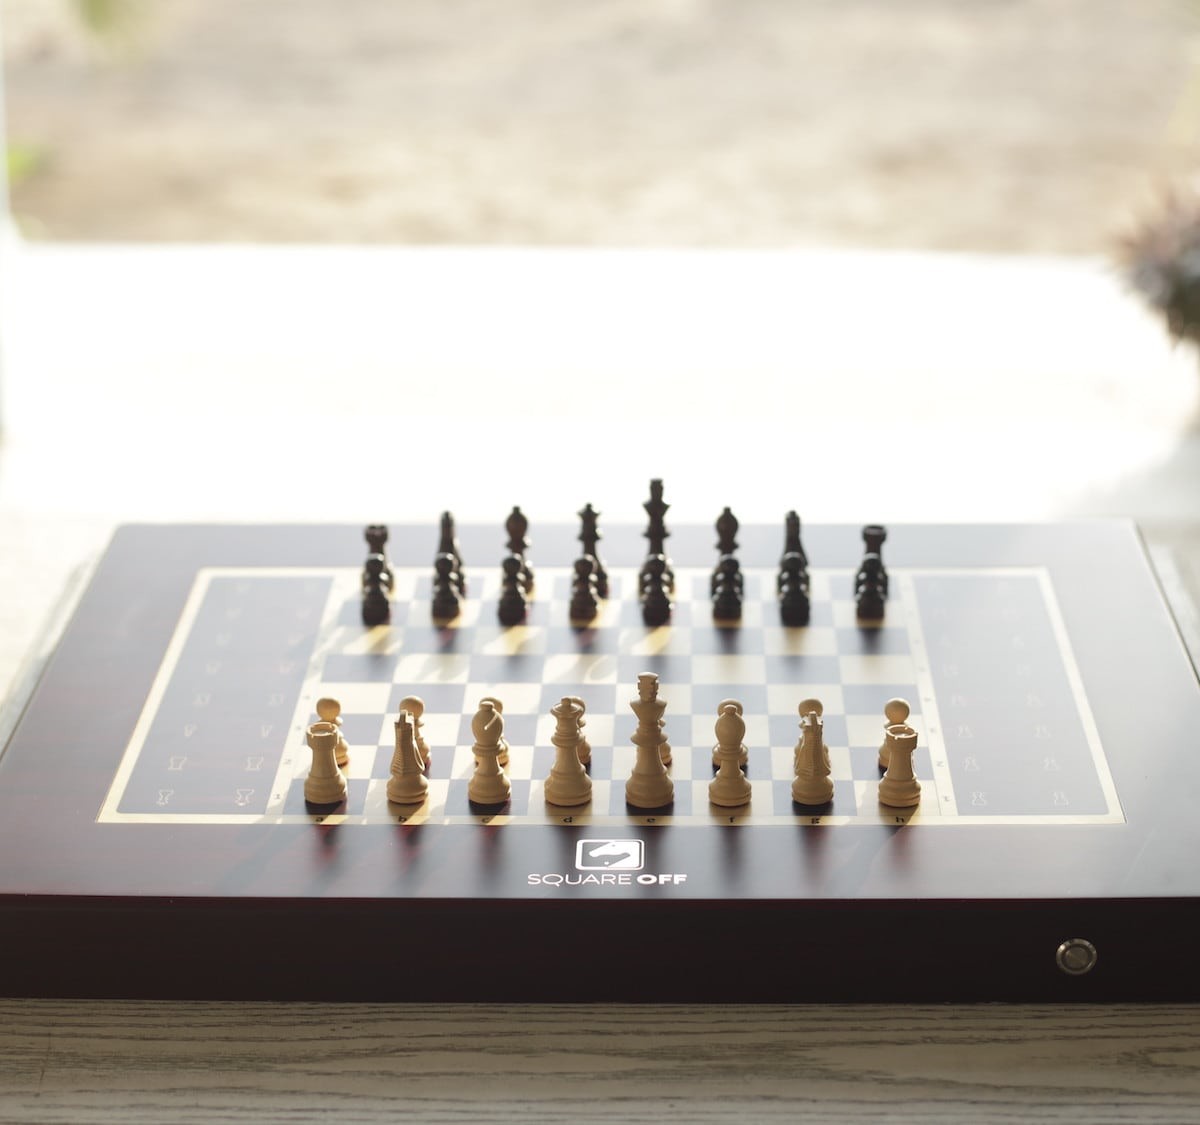 Square Off Grand Kingdom Set Smart AI Chessboard is so much smarter than meets the eye